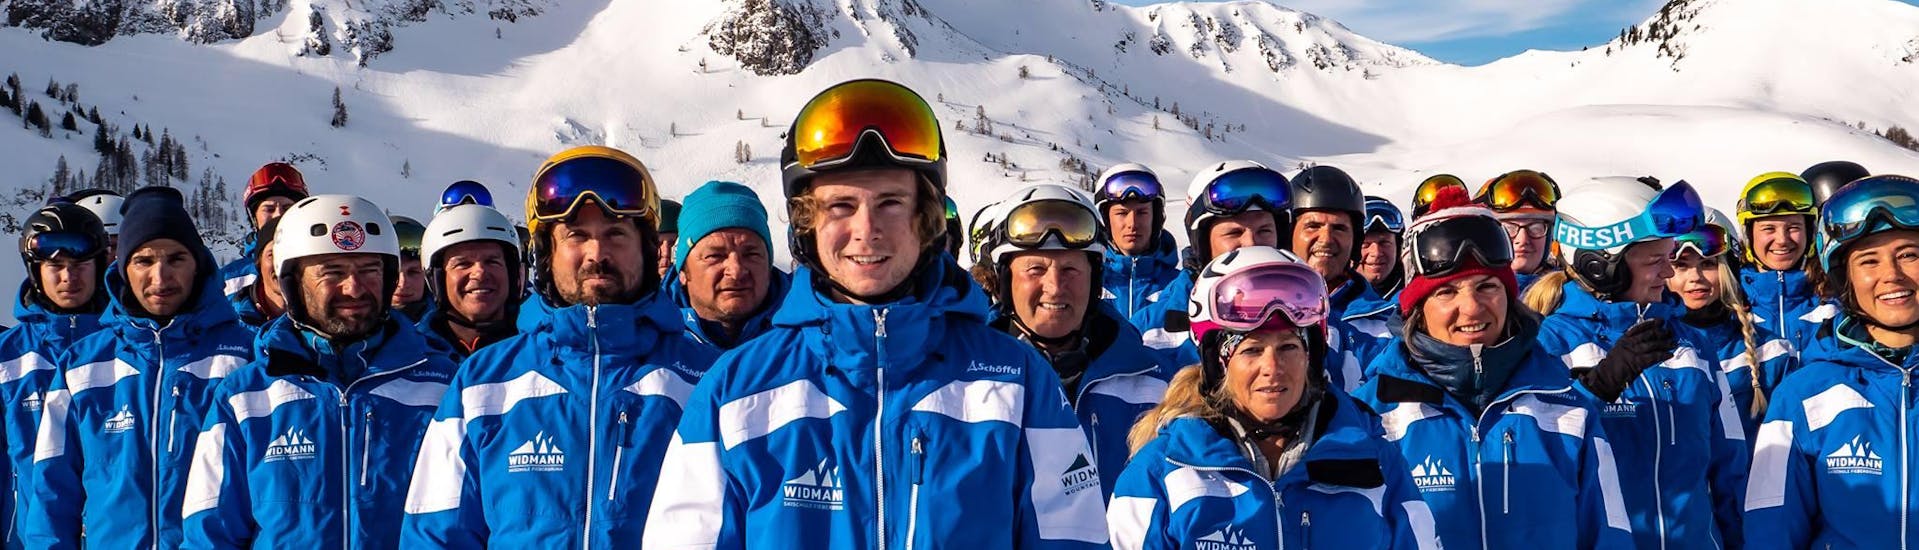 The ski instructors from the ski school Skischule Fieberbrunn Widmann Mountain Sports who teach Private Ski Lessons for Adults - All Levels are jointly posing for a group photo.